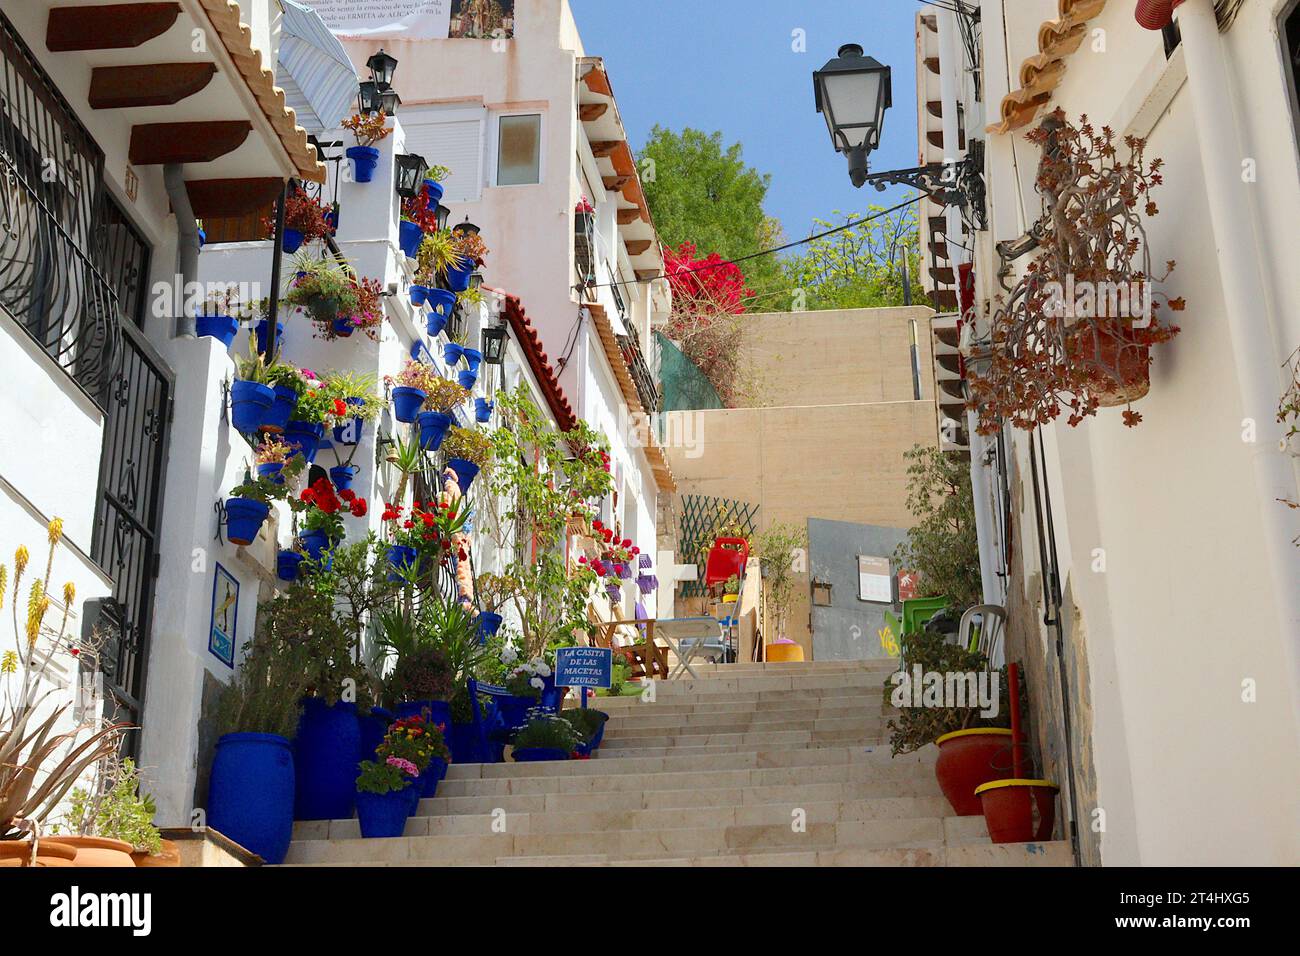 The house with the blue pots, a popular tourist attraction reached by steep steps. Hand painted pots contrast with brightly coloured flowers, Alicante. Stock Photo